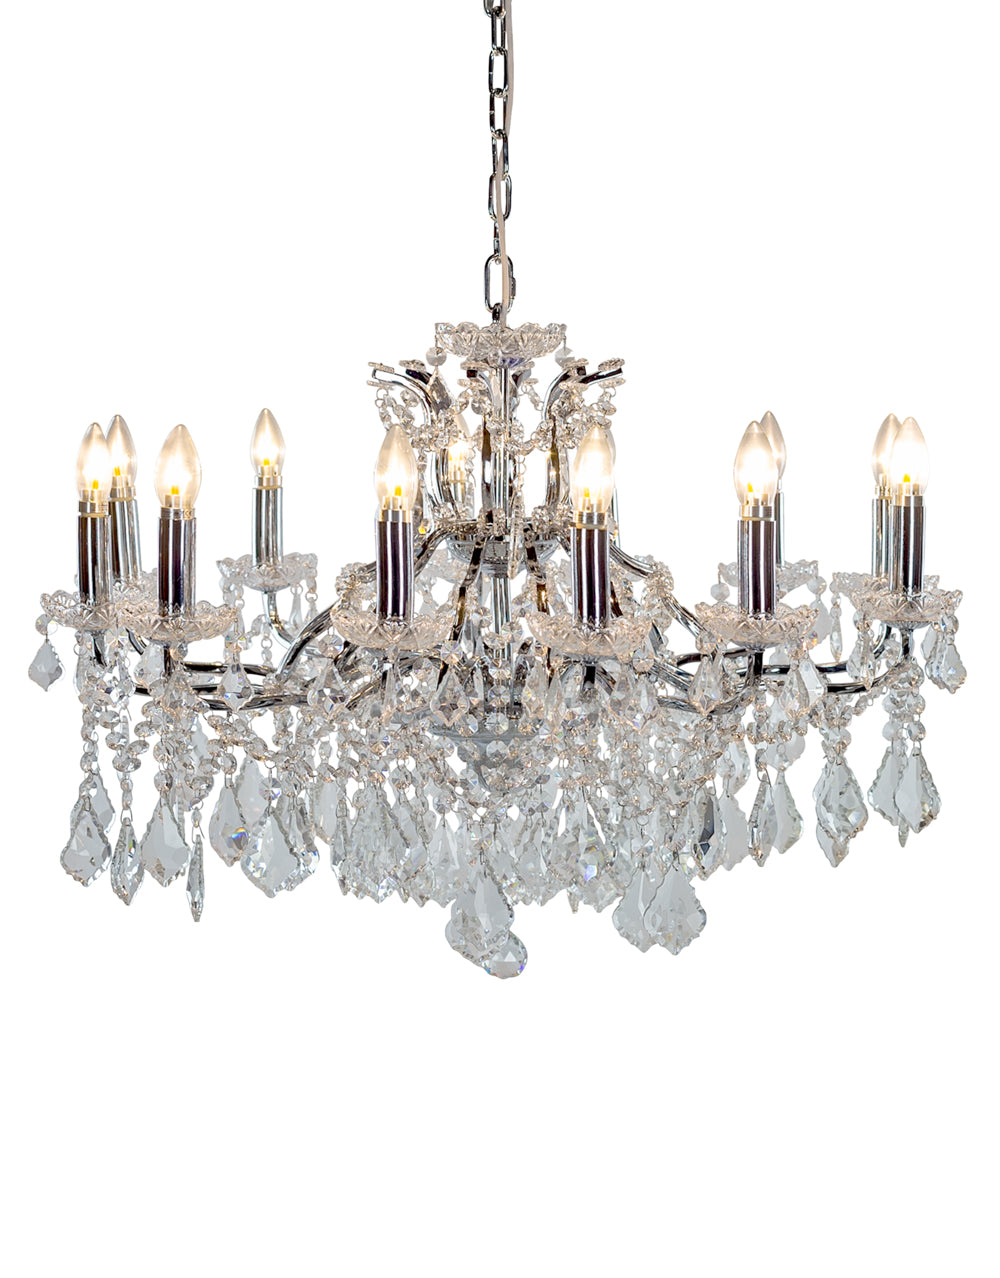 Large 12 Branch Chrome Shallow Chandelier